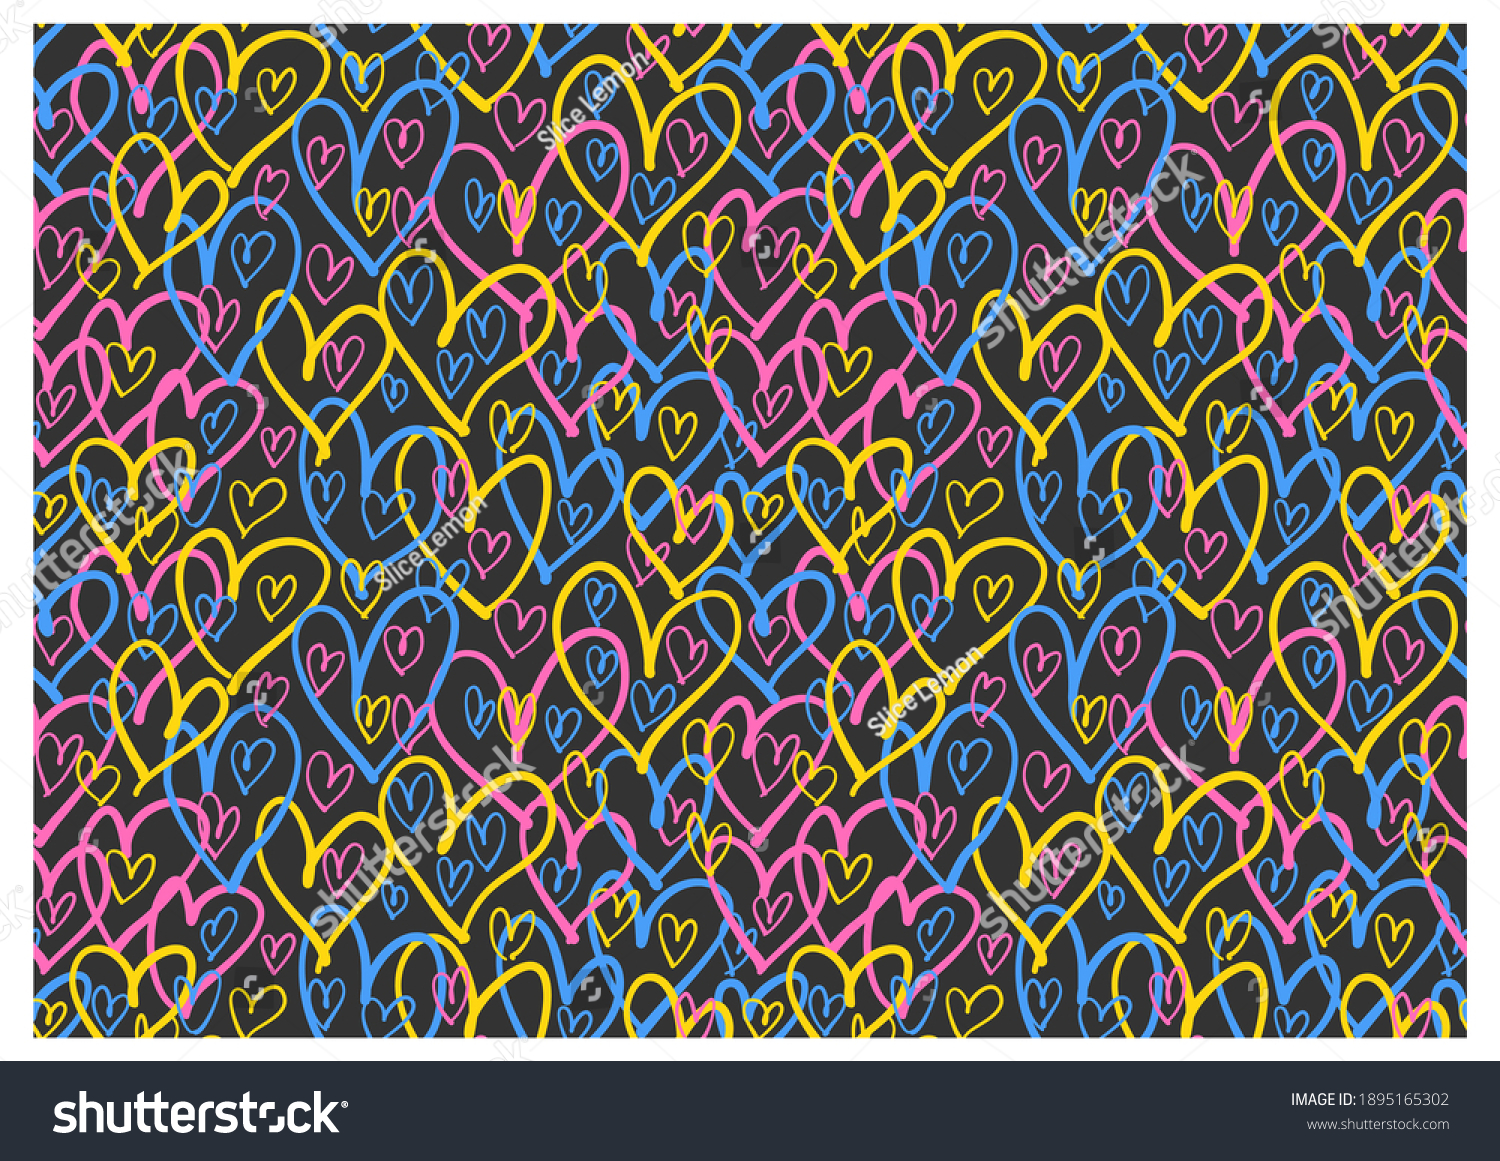 SVG of Horizontal pattern of graffiti hearts. Image for a poster or cover. Vector illustration. Repeating texture. Figure for textiles. svg